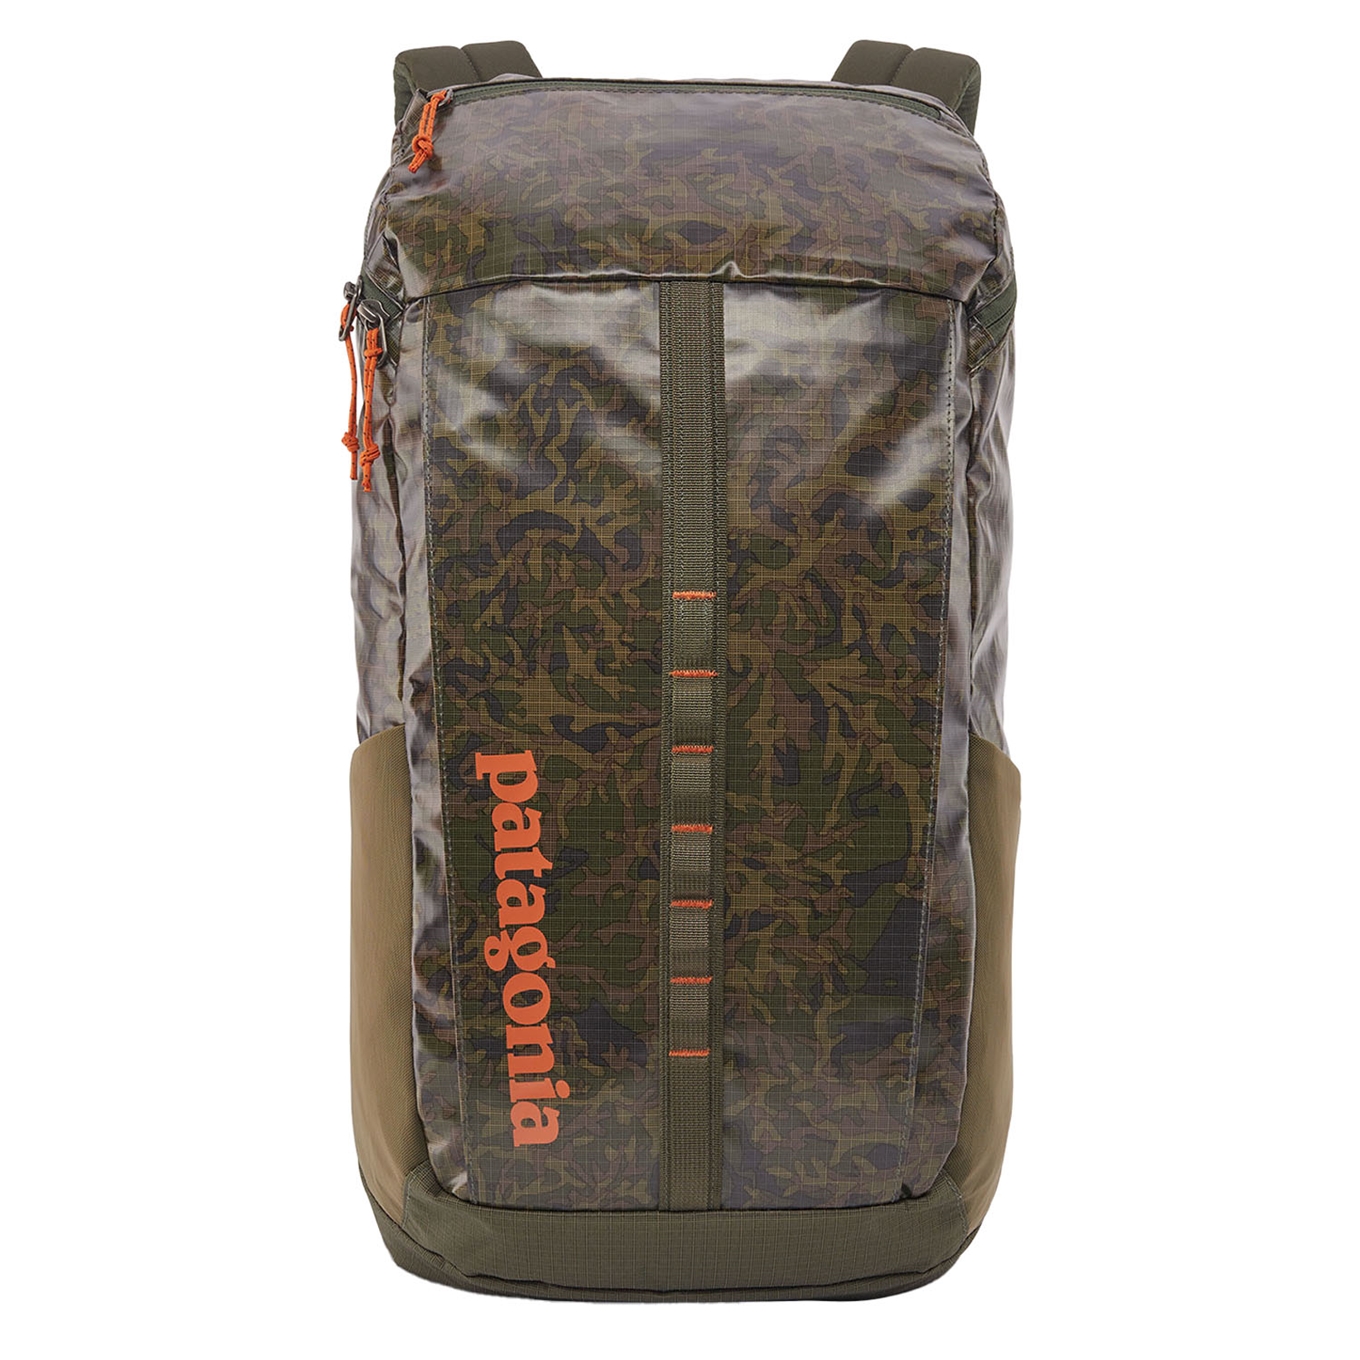 Patagonia Black Hole Pack 25L lichen: basin green backpack